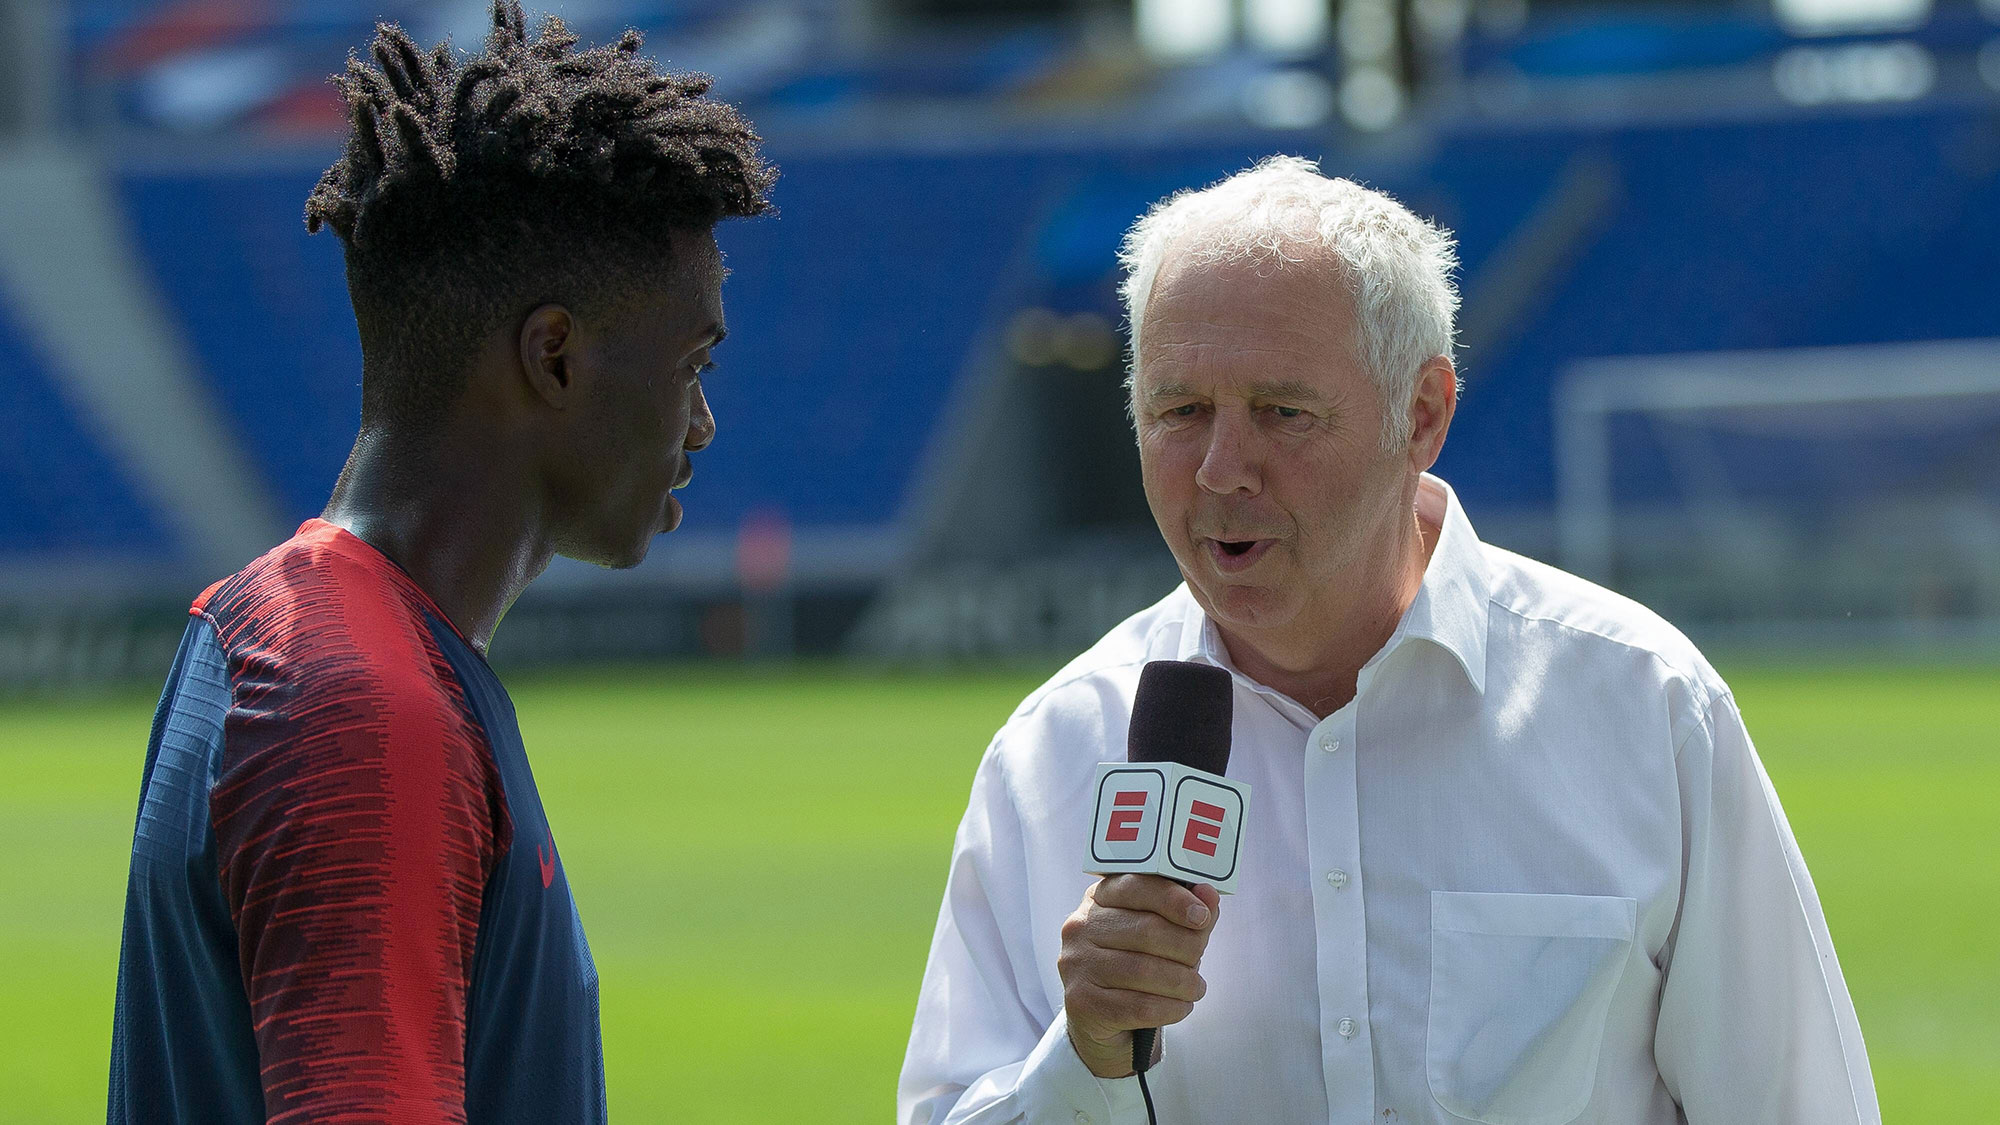 Ian Darke joins Fox to call 2022 World Cup matches Sports Illustrated